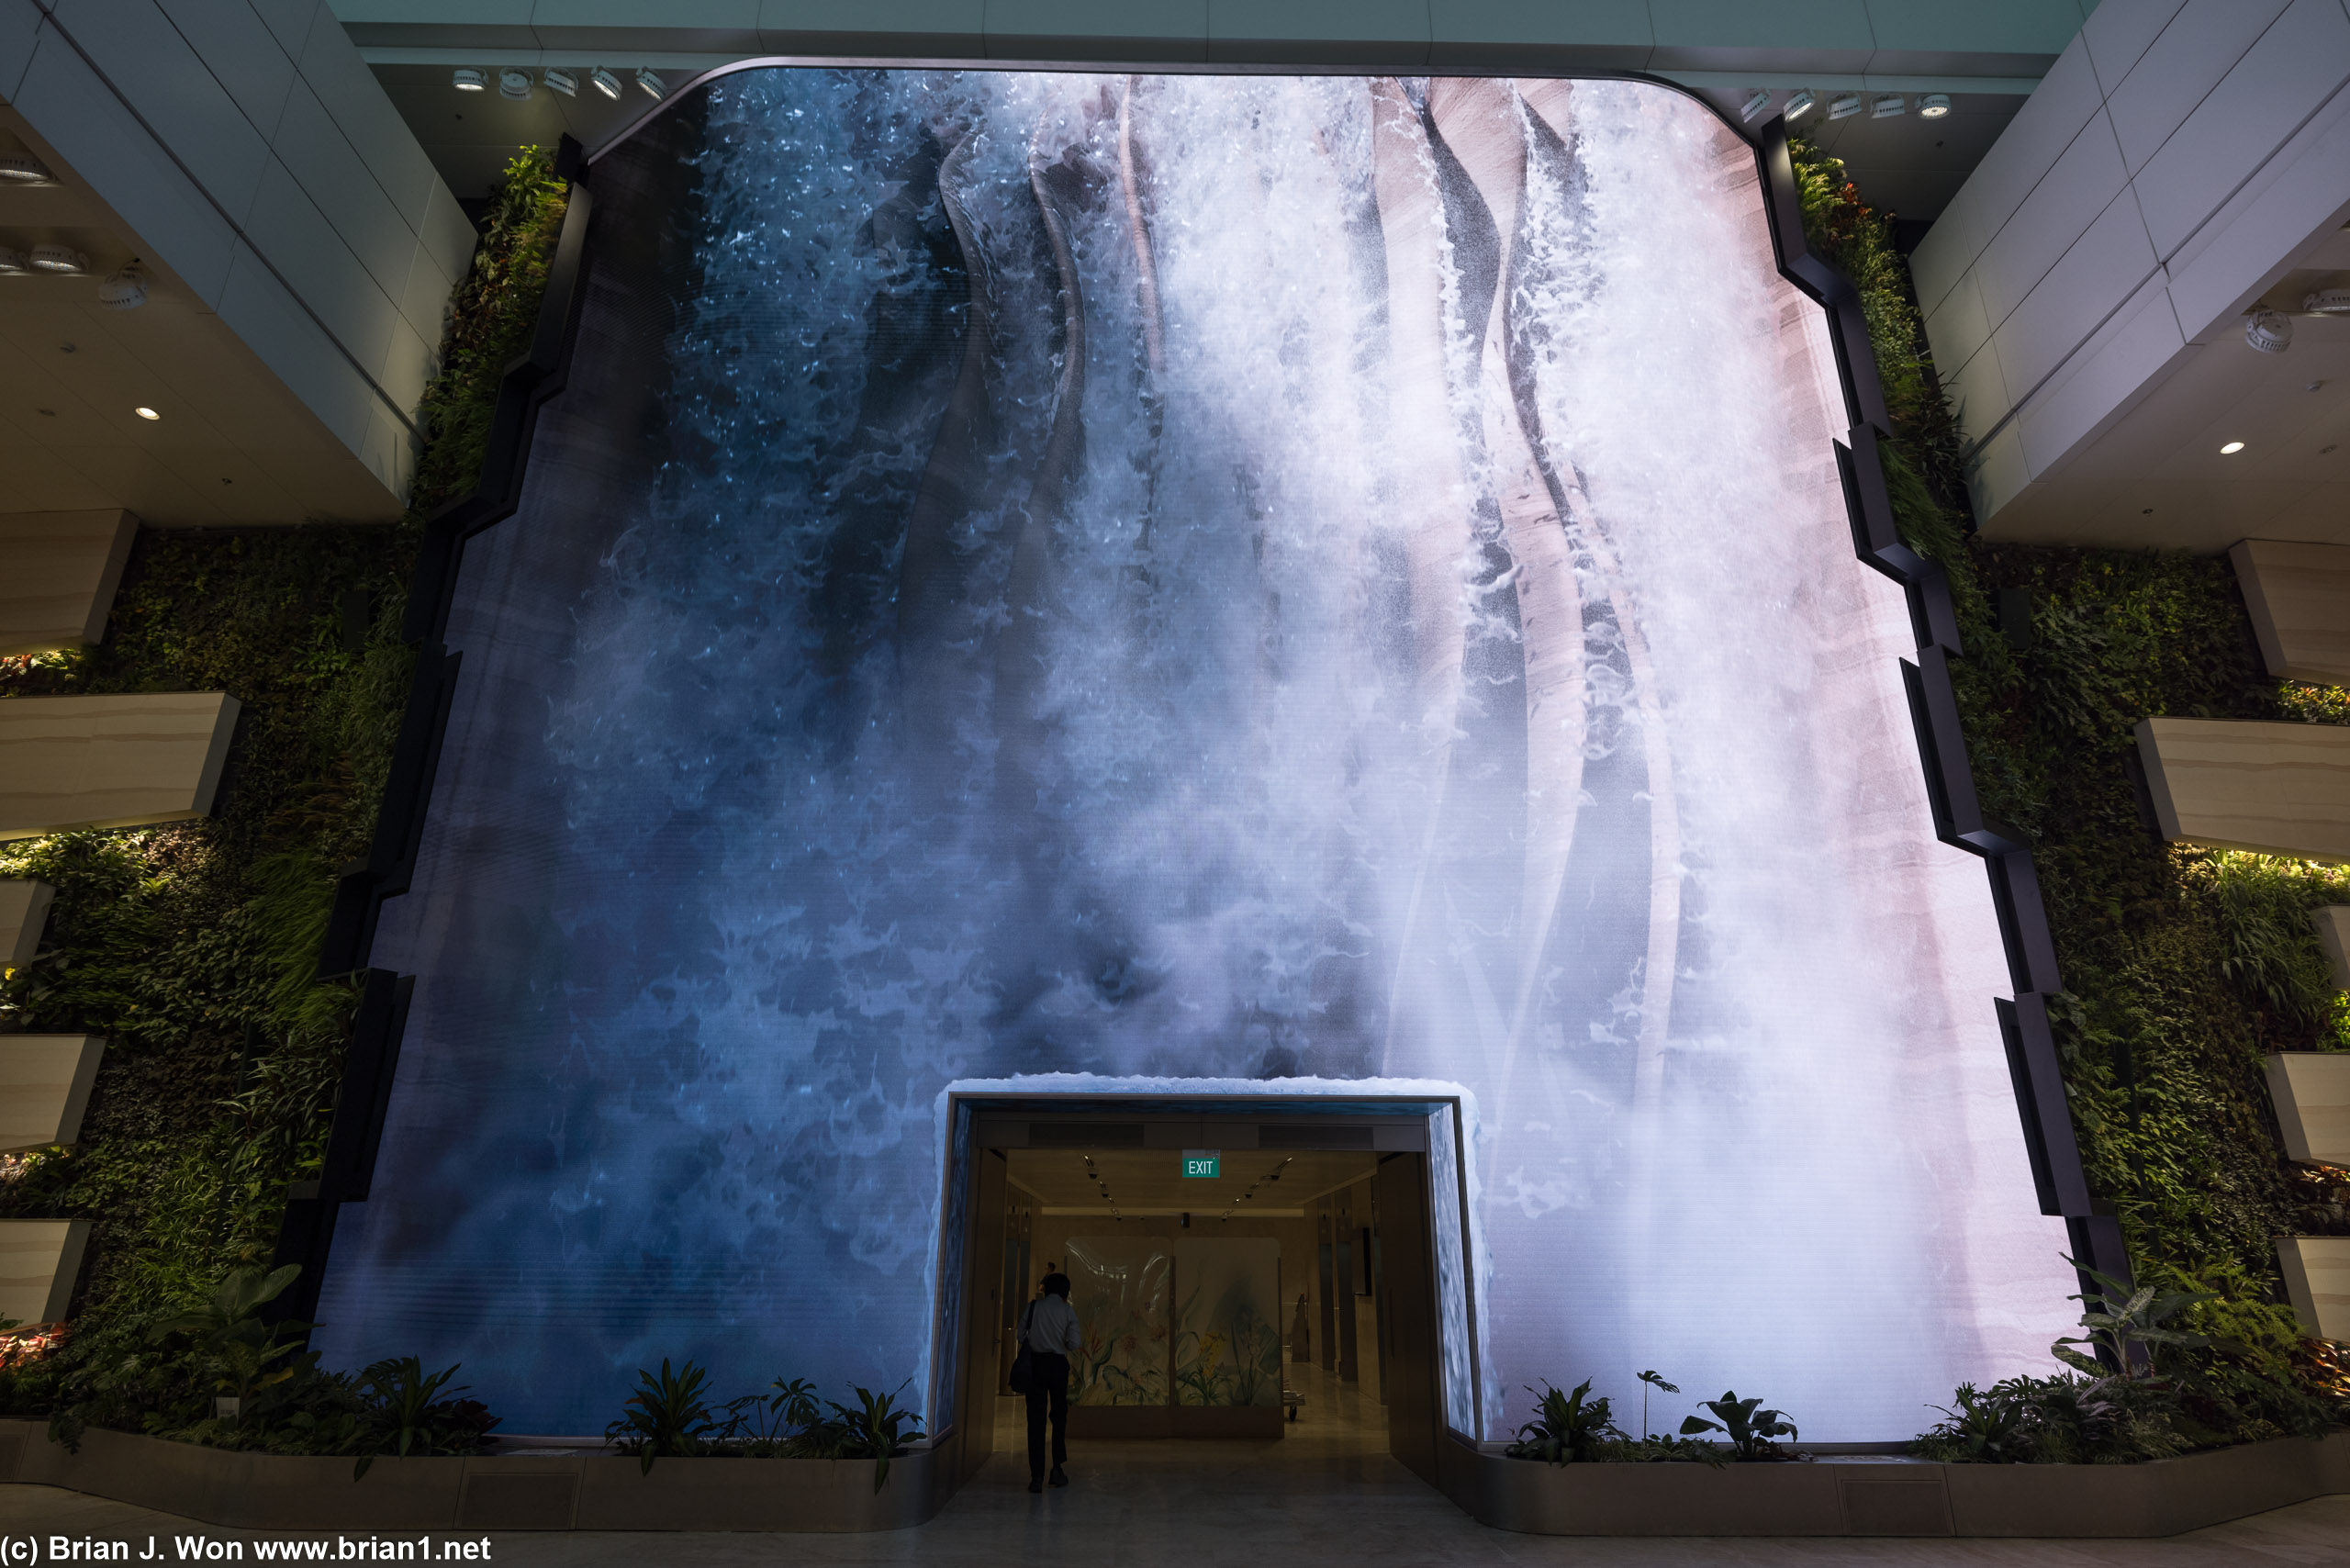 They just added this 14 meter high digital waterfall at Terminal 2.